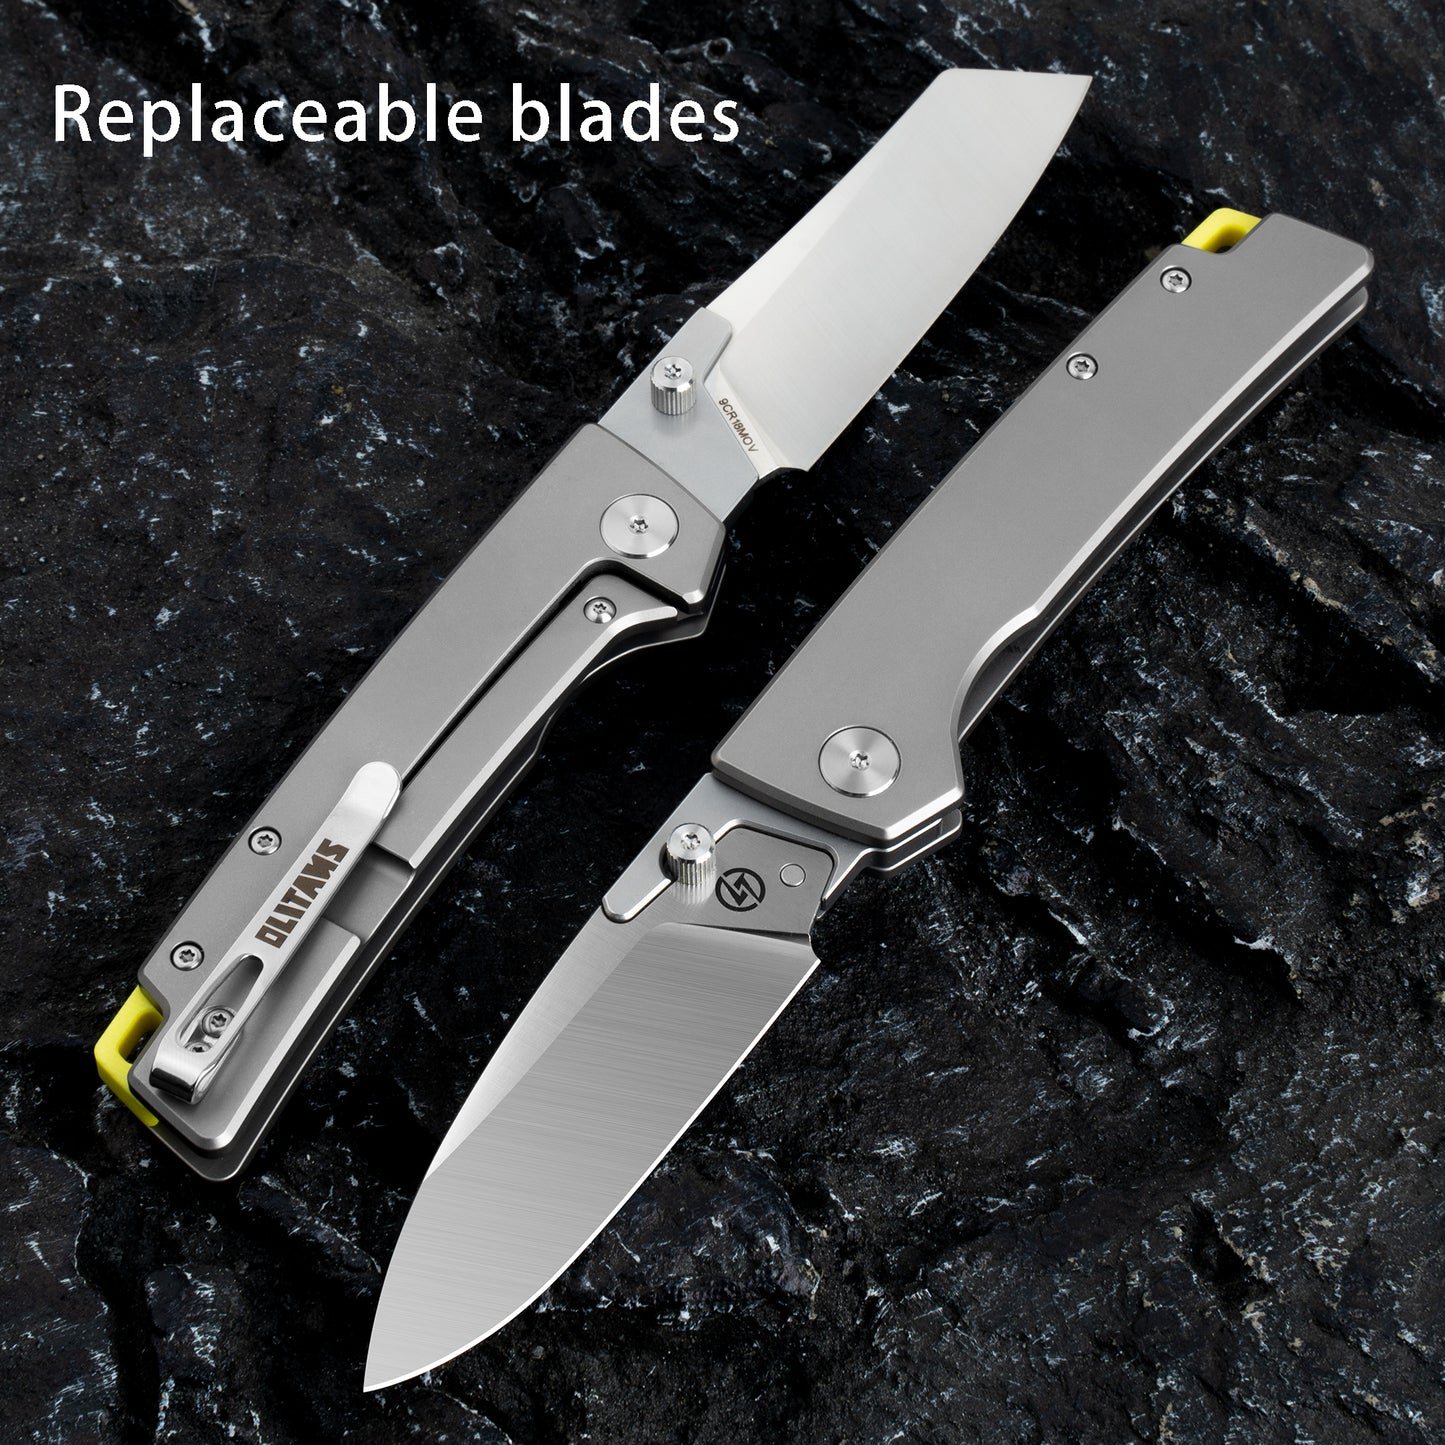 OLITANS T024 Folding Knife for EDC, Replaceable blades Pocket knife, TC4 Titanium Alloy Handle, for Outdoor, Survival, Hunting and Camping, 4.4oz